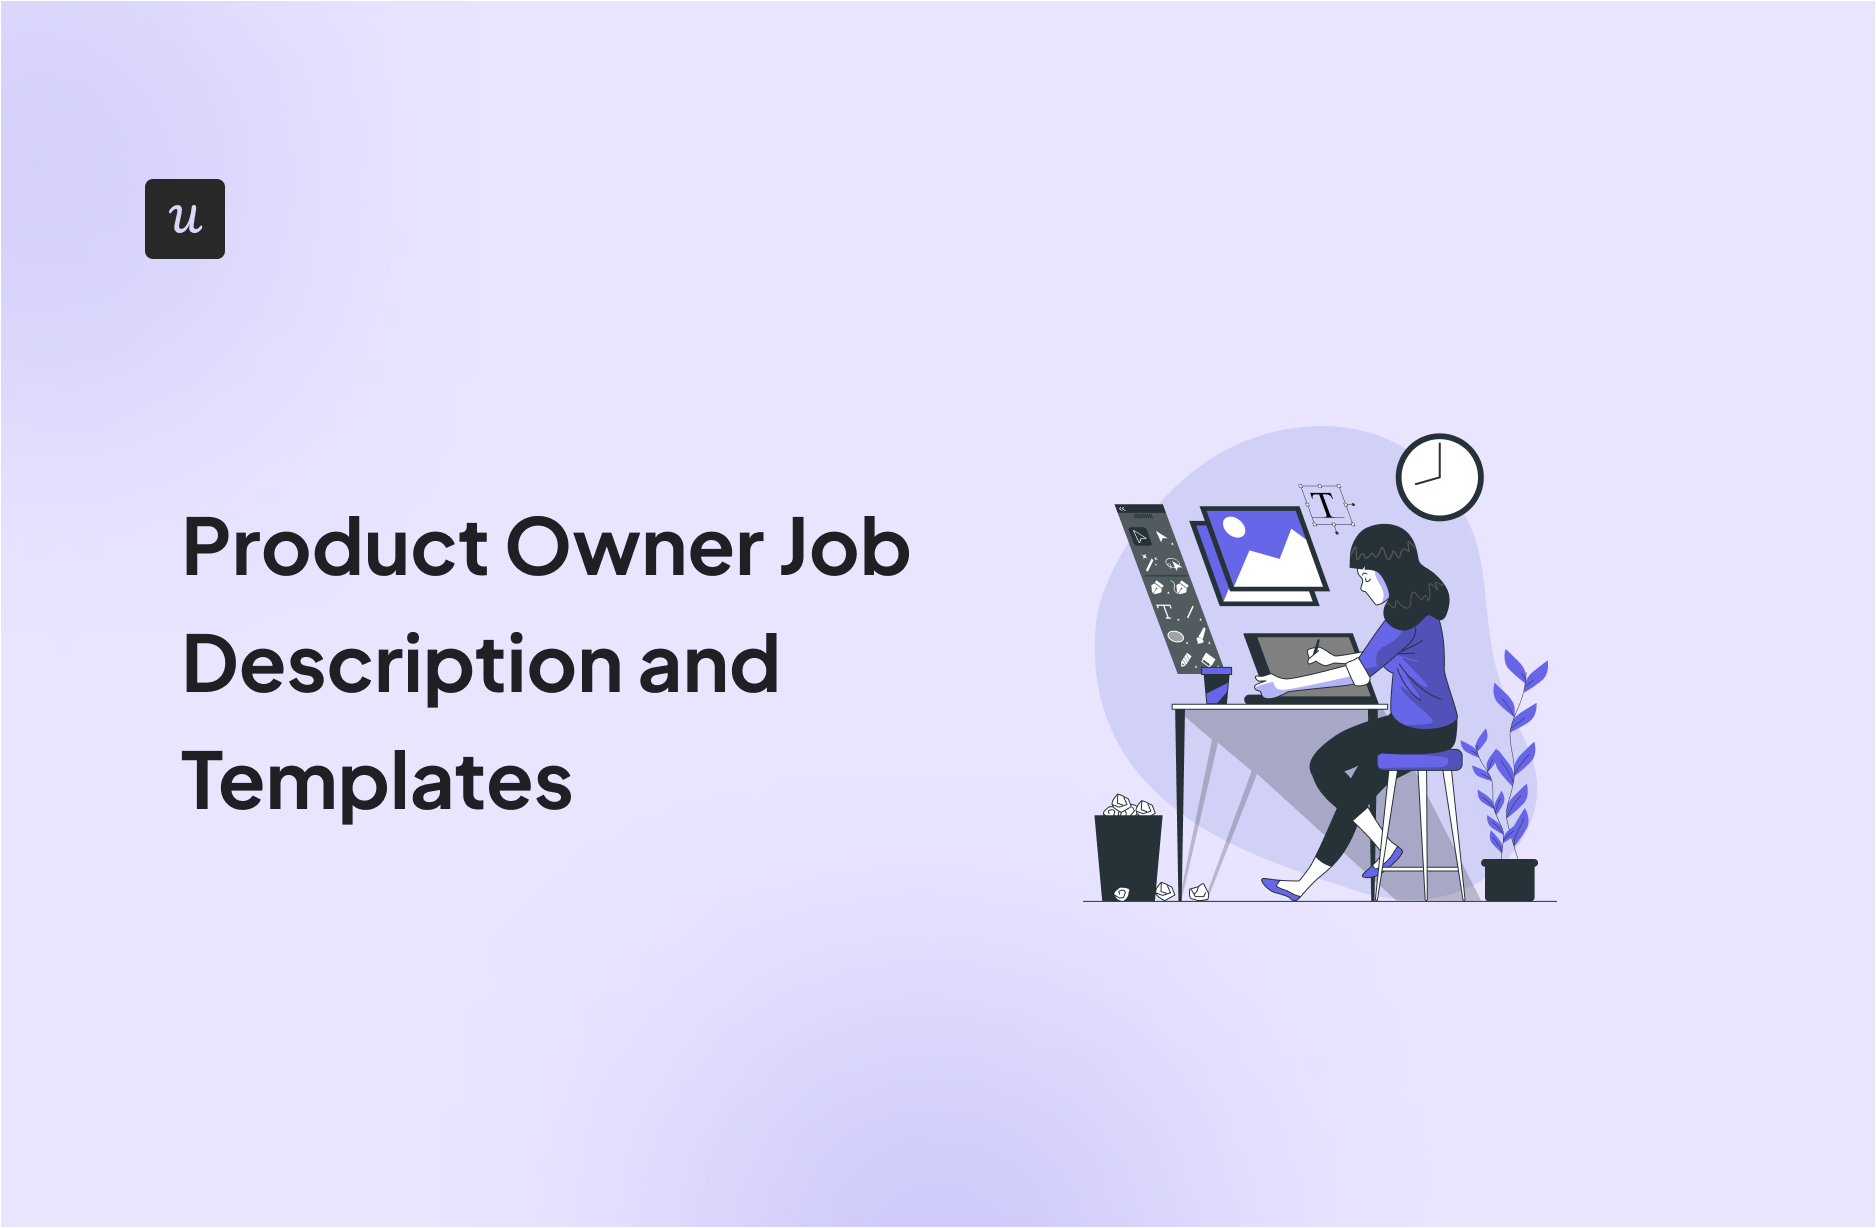 Product Owner Job Description and Templates